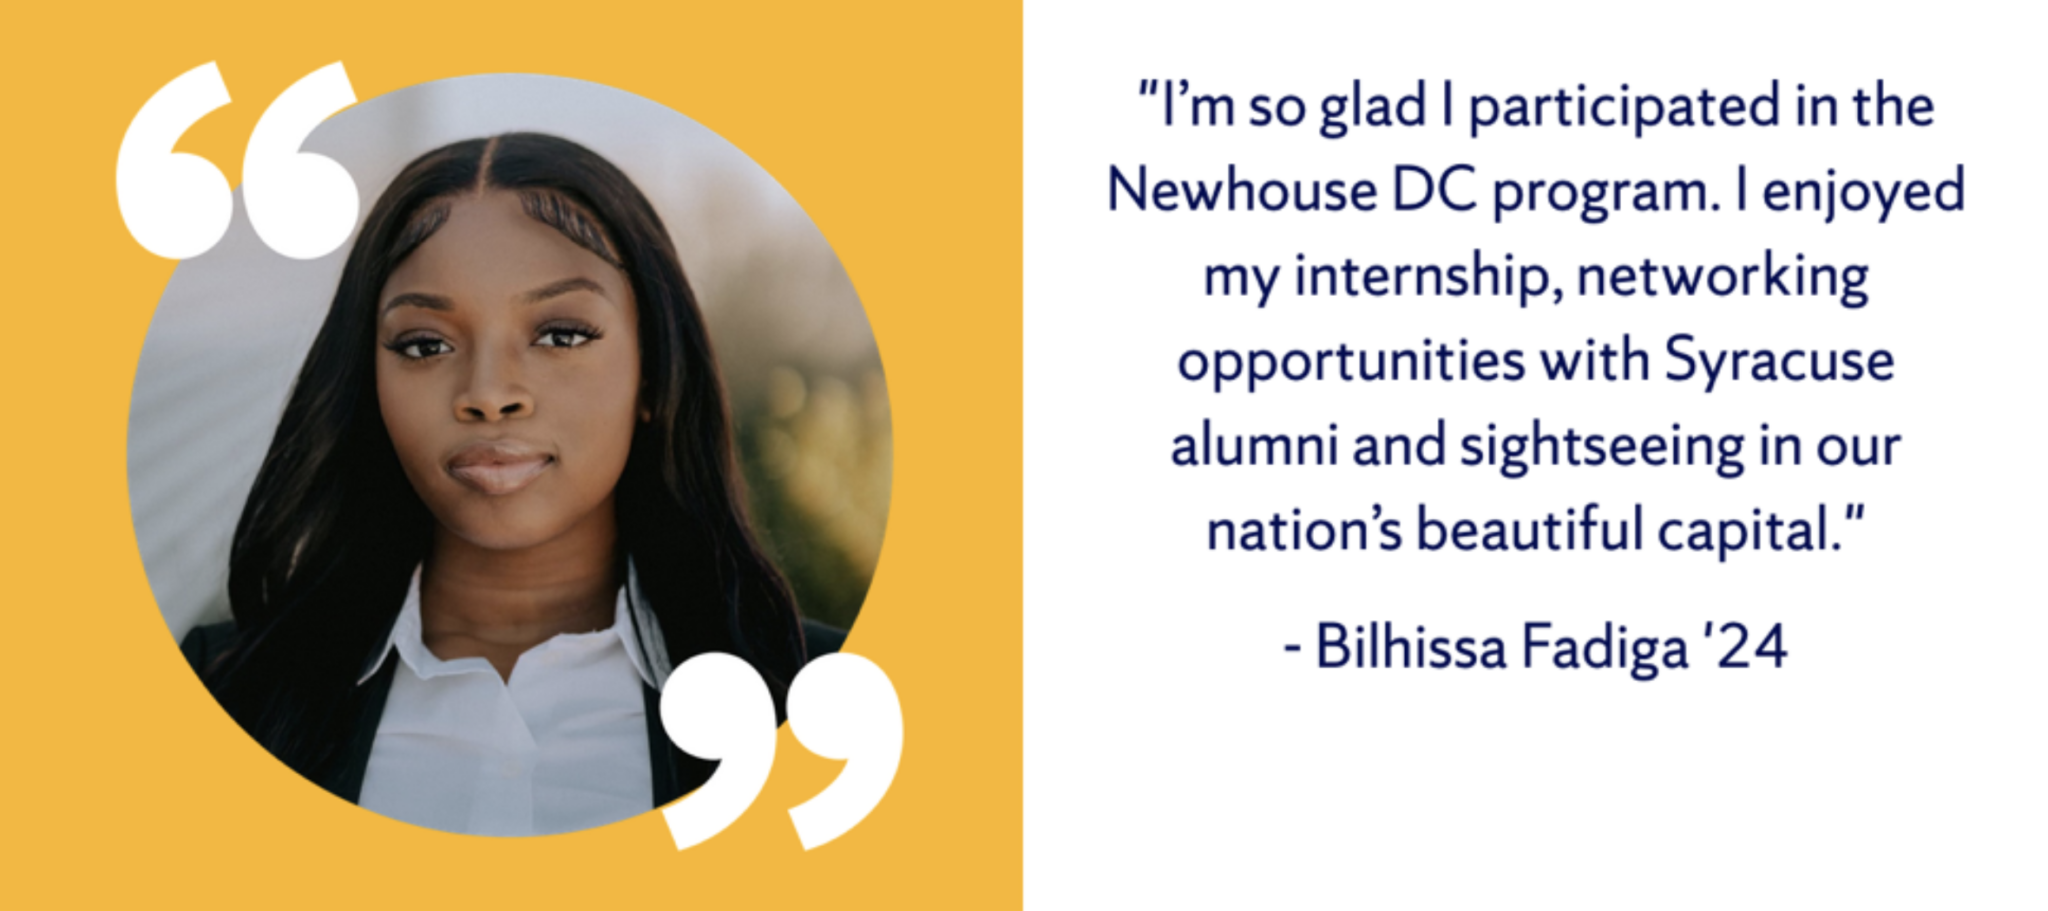 Photo of Newhouse student Bilhissa Fadiga next to a quote: "I'm so glad I participated in the Newhouse DC program. I enjoyed my internship, networking opportunities with Syracuse alumni and sightseeing in our nation's beautiful capital."